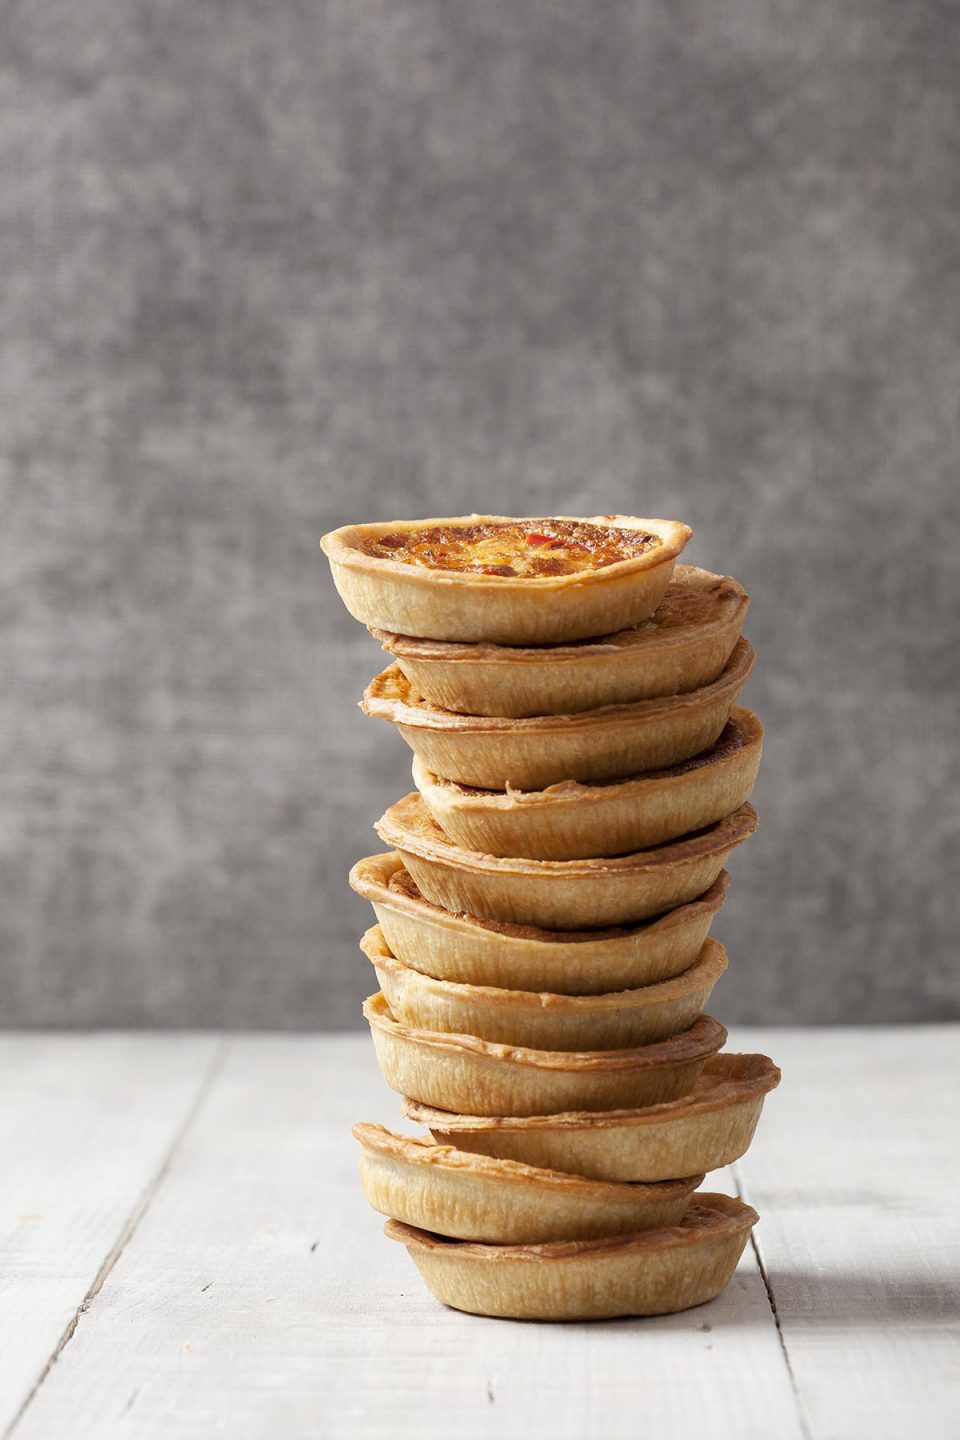 Photo of quiches piled high in a tower. Made by Crantock Bakery in Cornwall